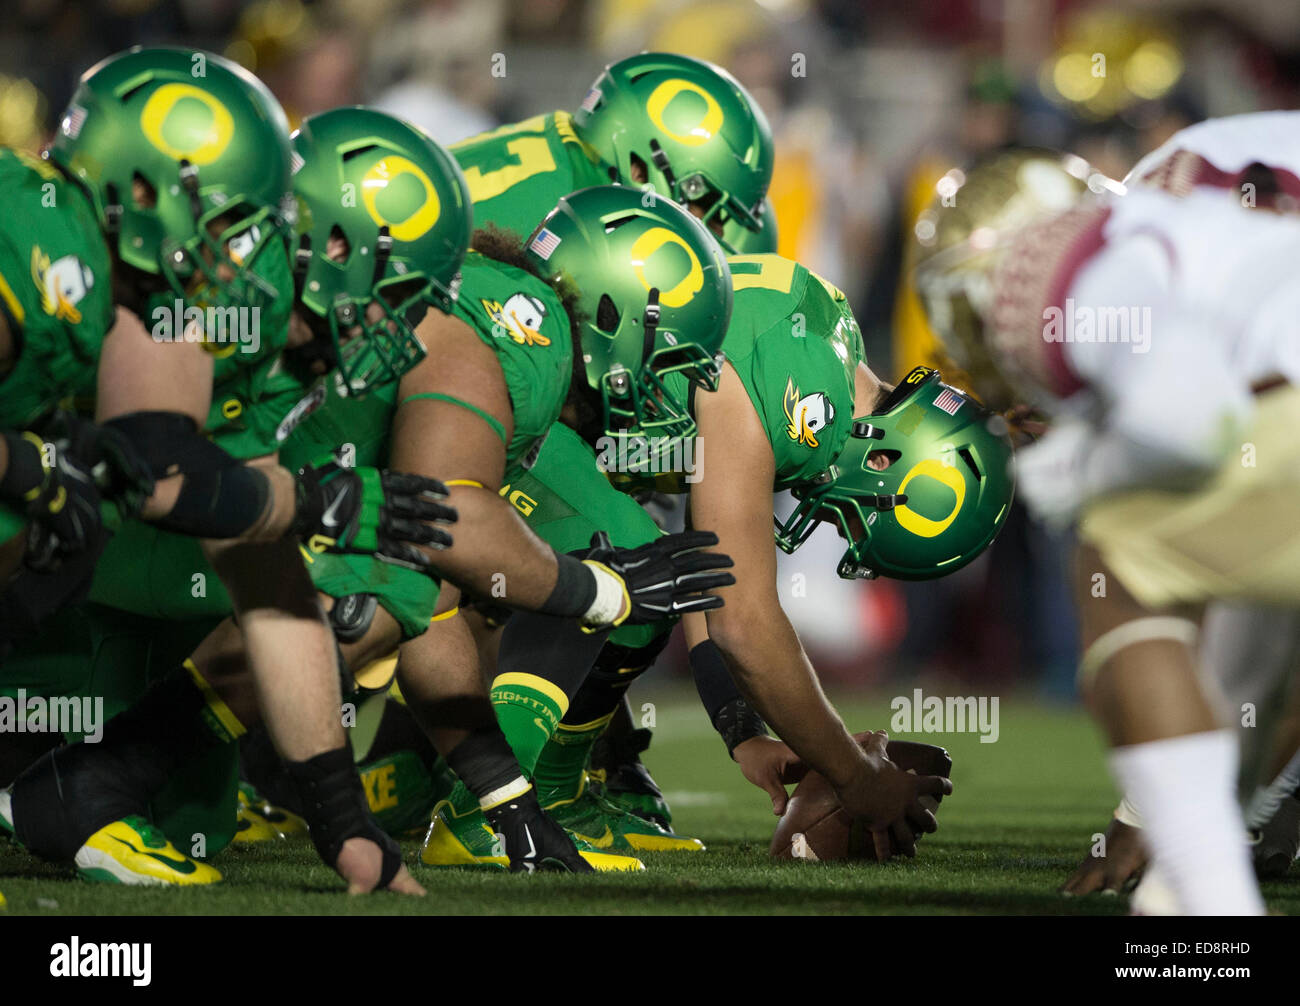 Los Angeles, USA. 1st Jan, 2015. Players of the Oregon Ducks compete during the 2015 Rose Bowl college football game against the Florida State Seminoles at Rose Bowl in Los Angeles, the United States, Jan. 1, 2015. Oregon Ducks won the game 59-20. Credit:  Yang Lei/Xinhua/Alamy Live News Stock Photo